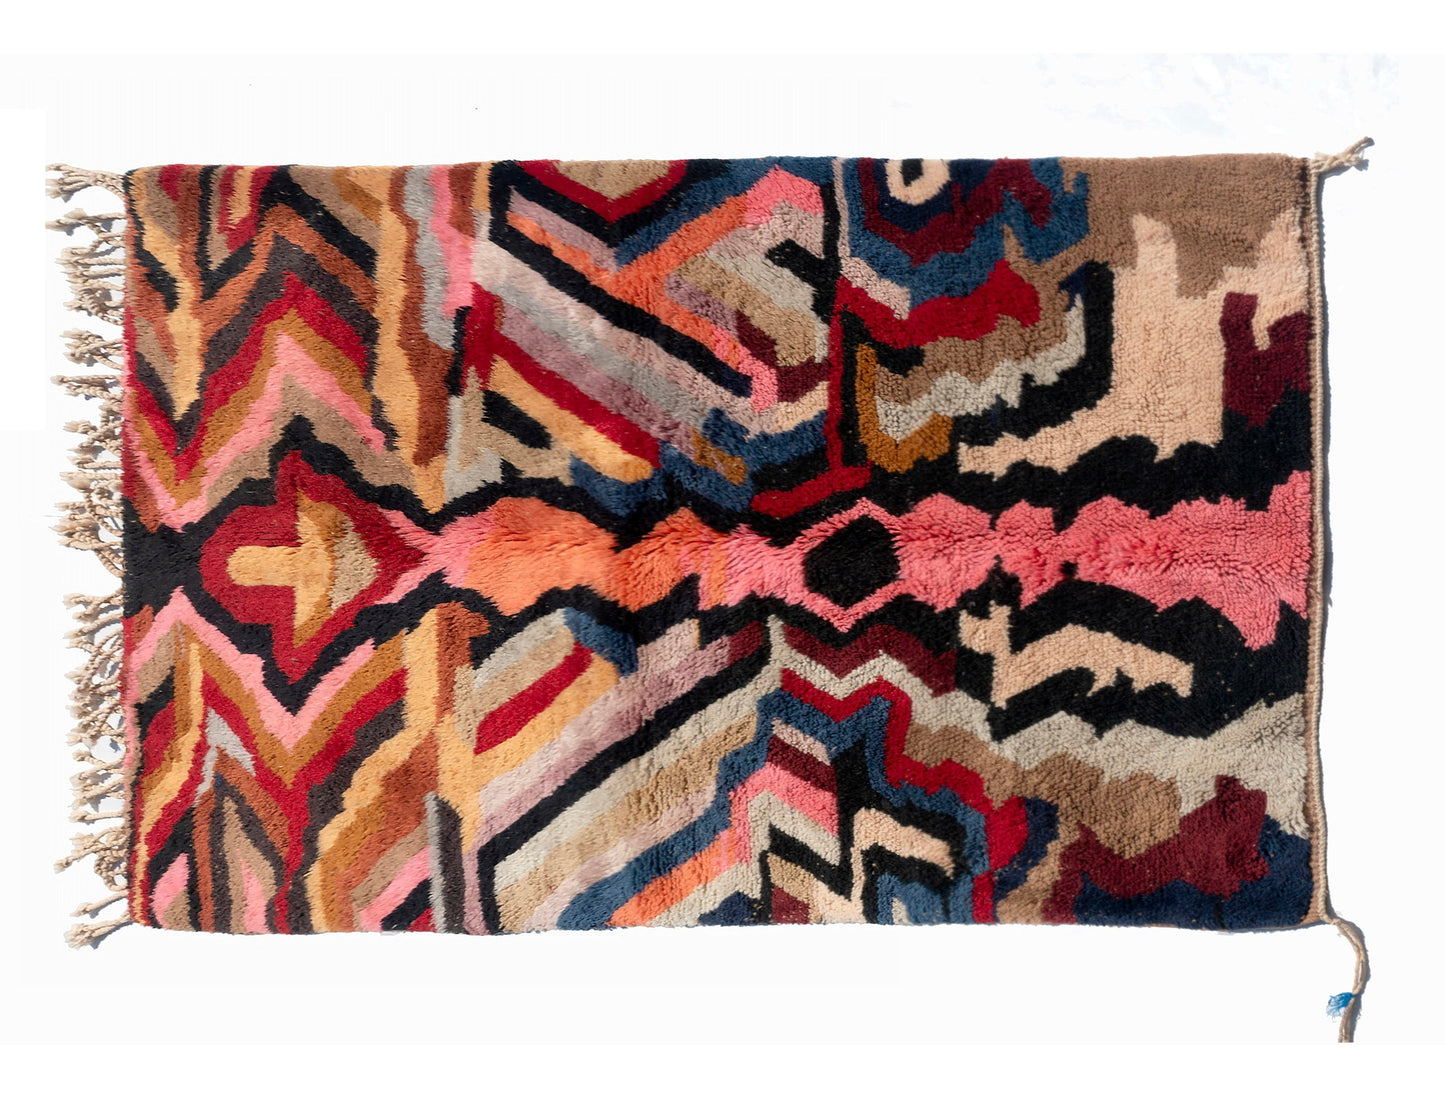 moroccanrugs, carpets, rugs, area rugs, ruggable rugs, outdoor rugs,